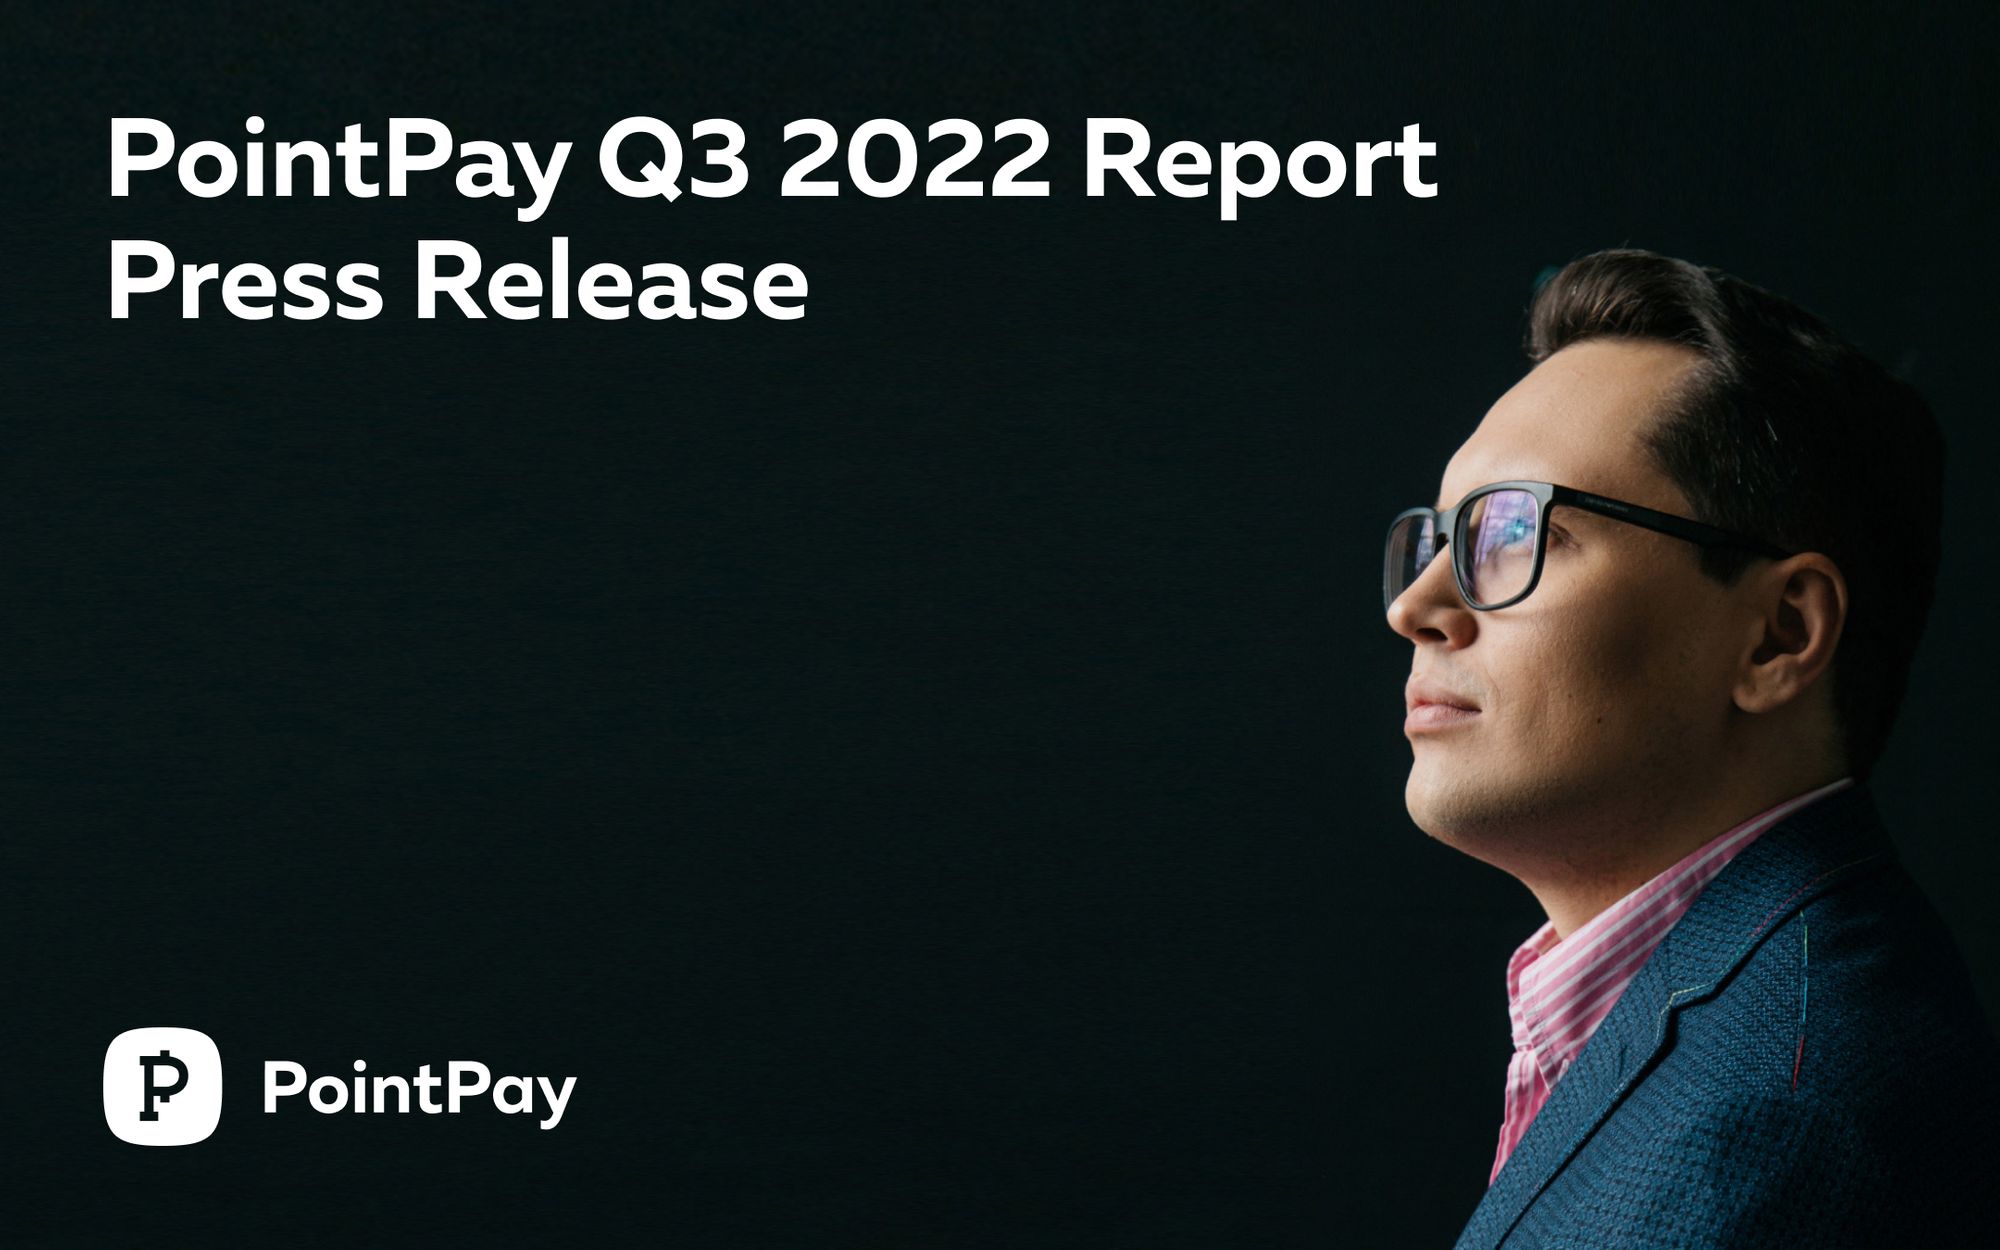 PointPay Q3 2022 Report in Media